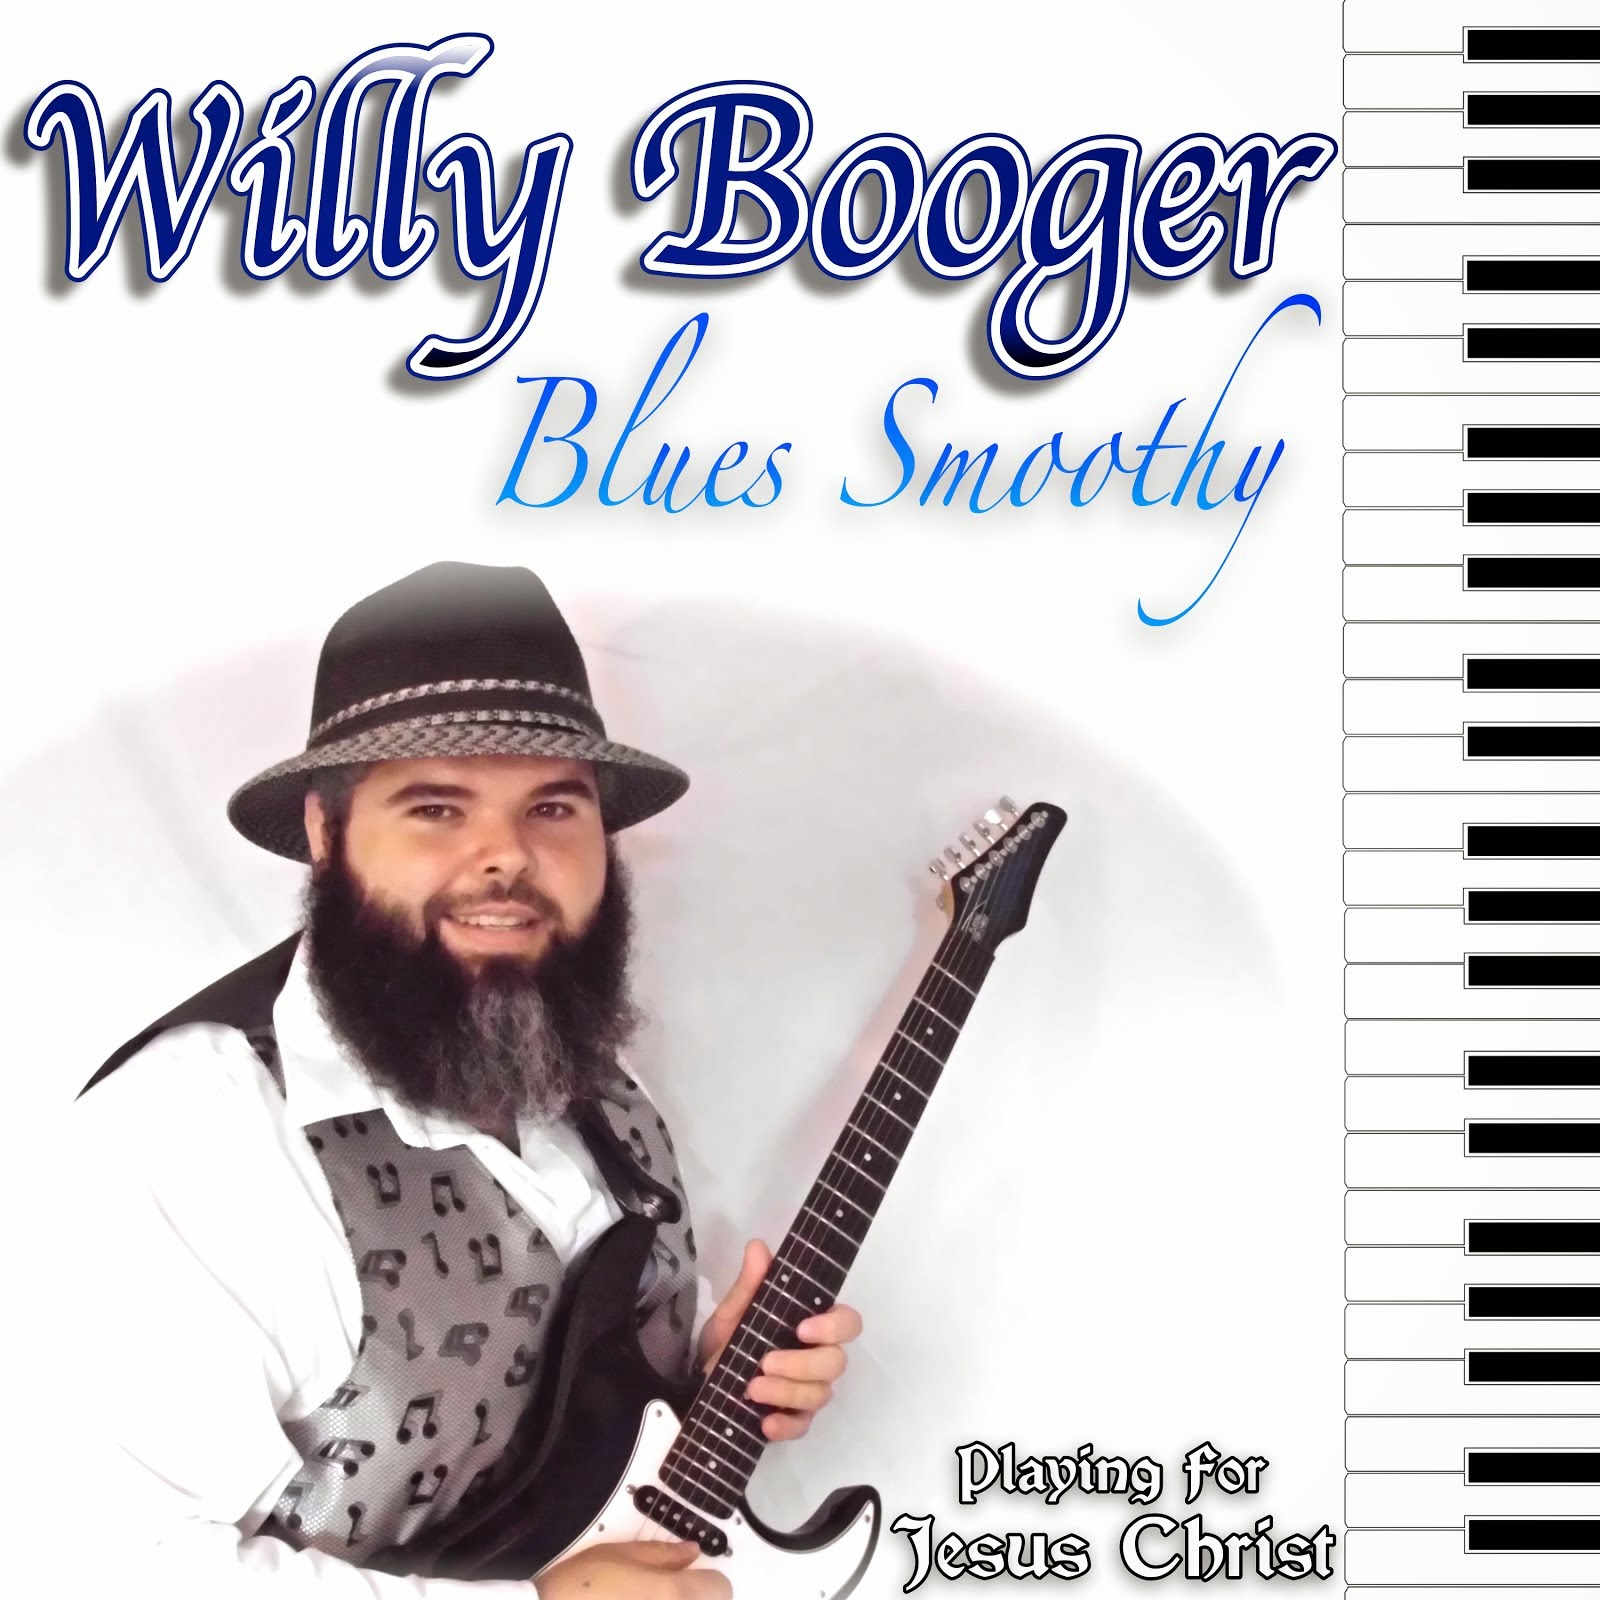 Willy Booger "Blues Smoothy"  (click to download)